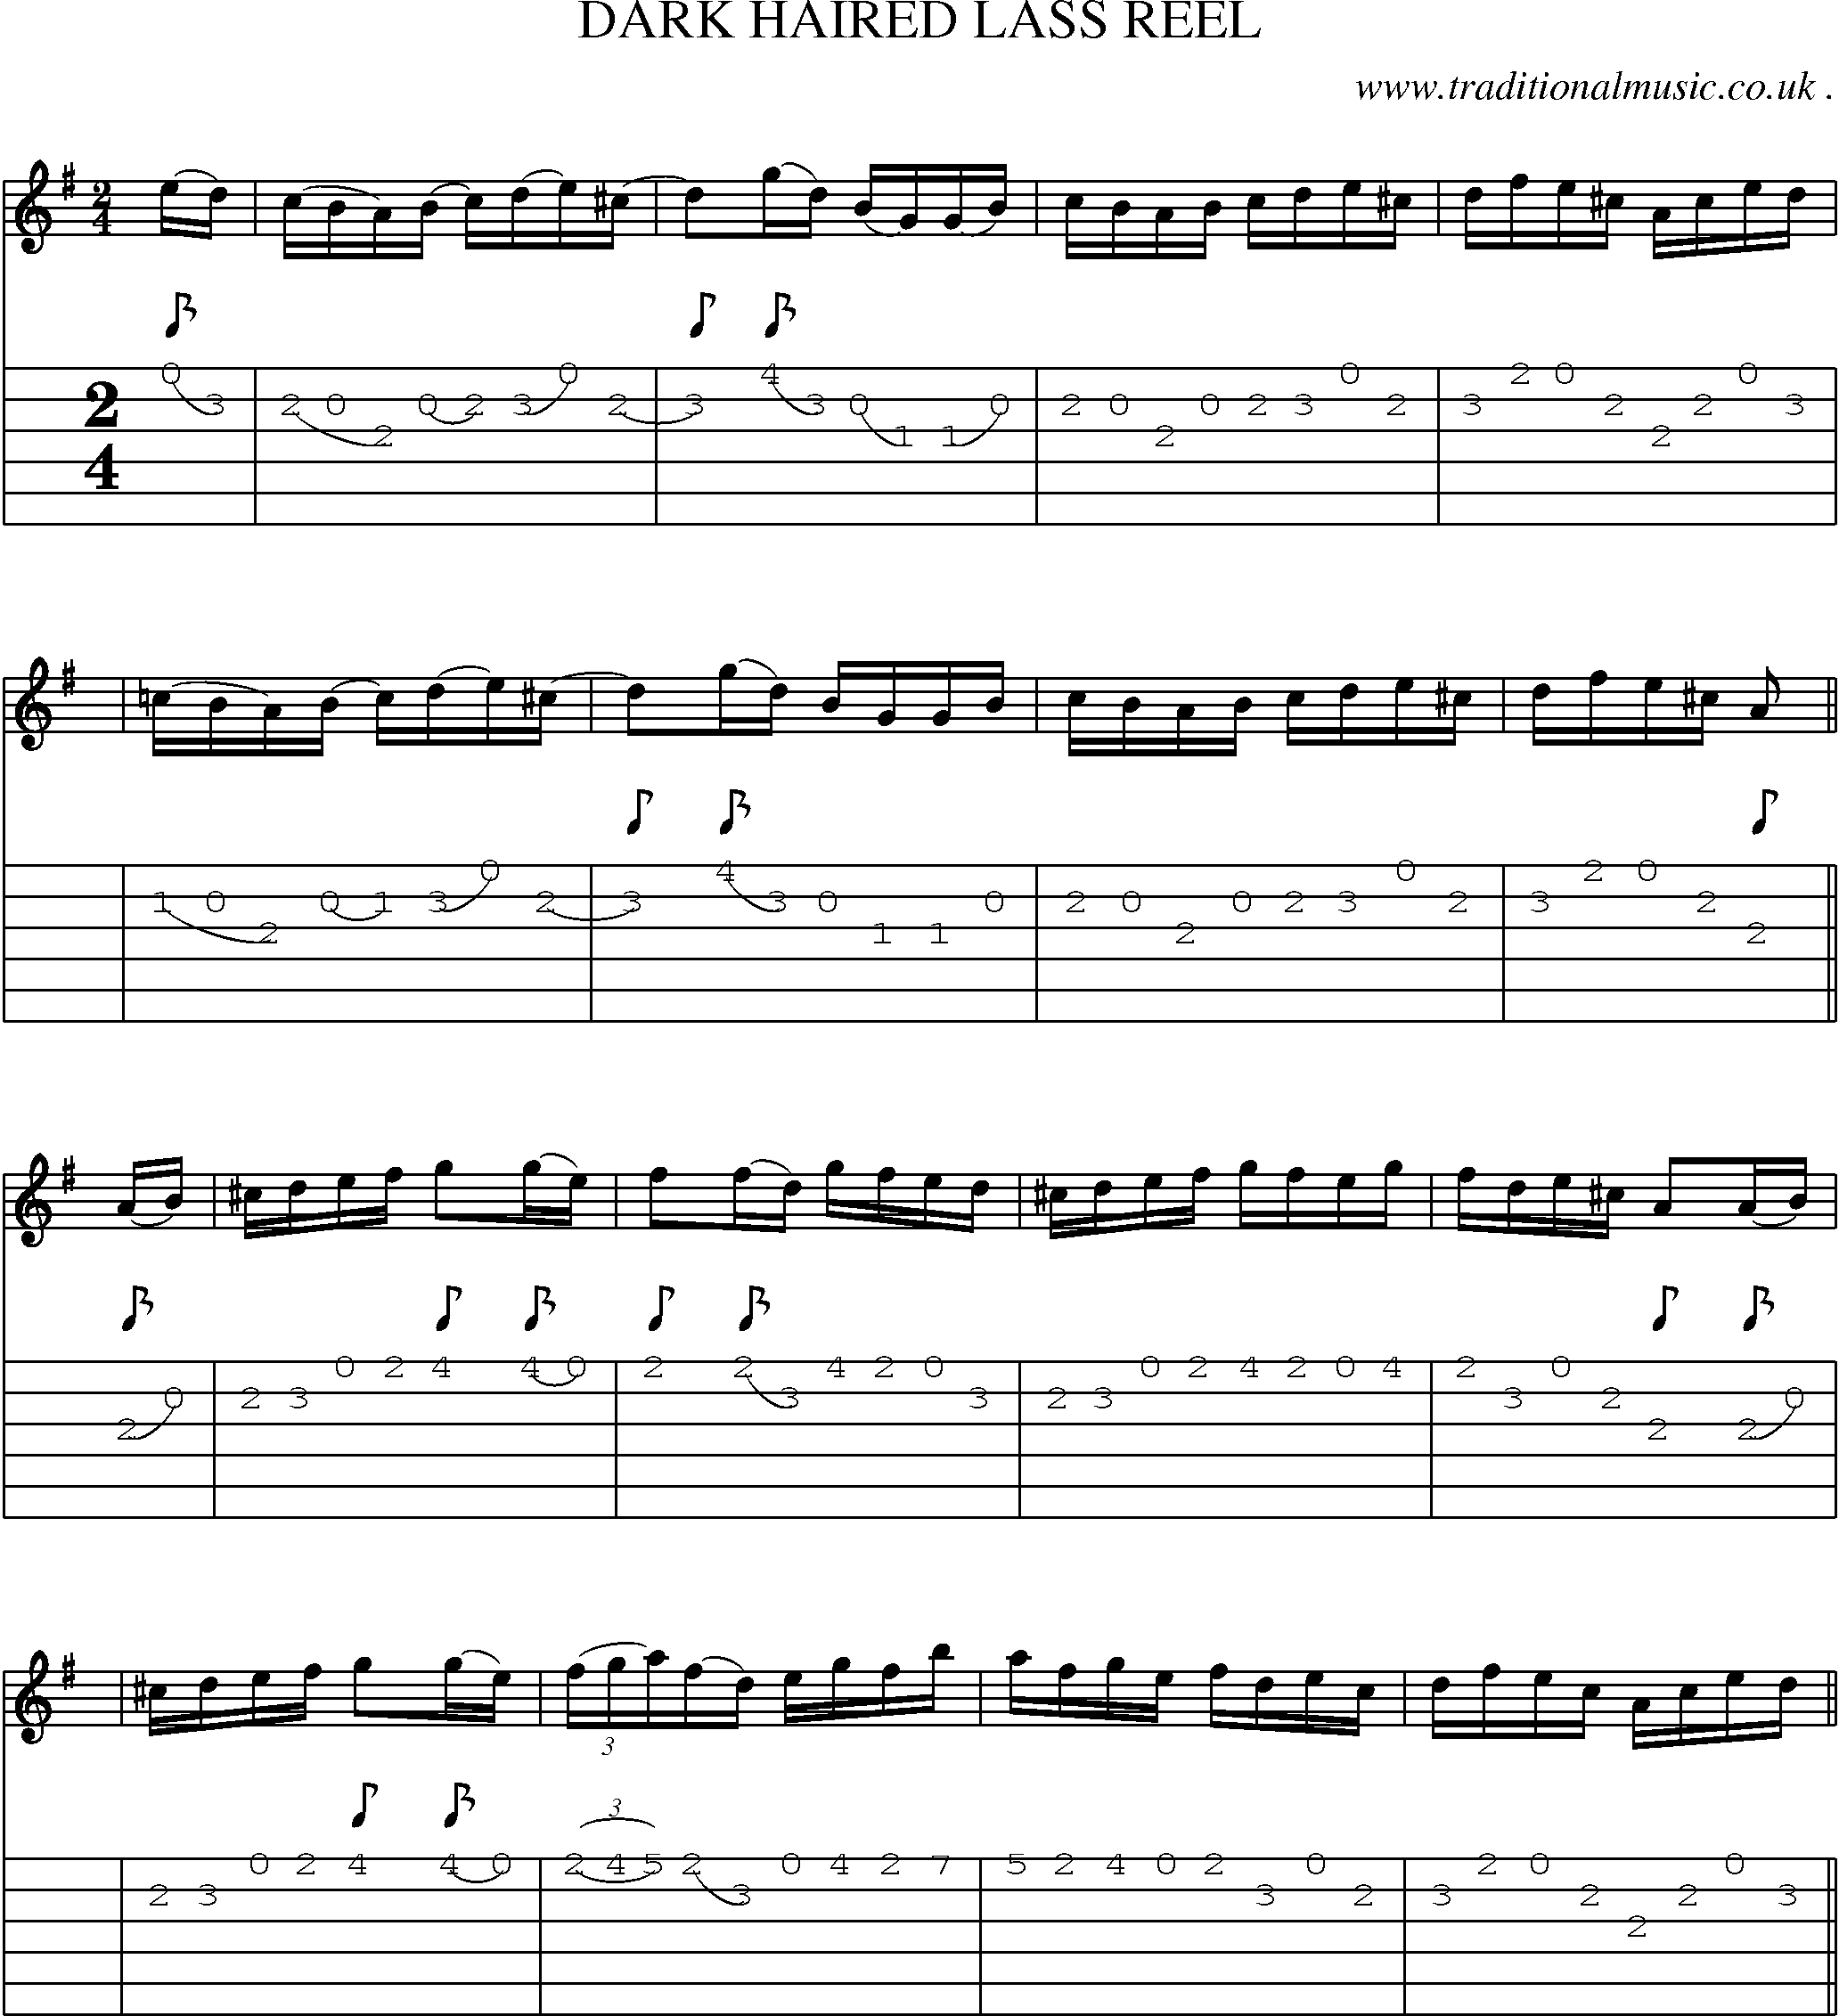 Sheet-Music and Guitar Tabs for Dark Haired Lass Reel